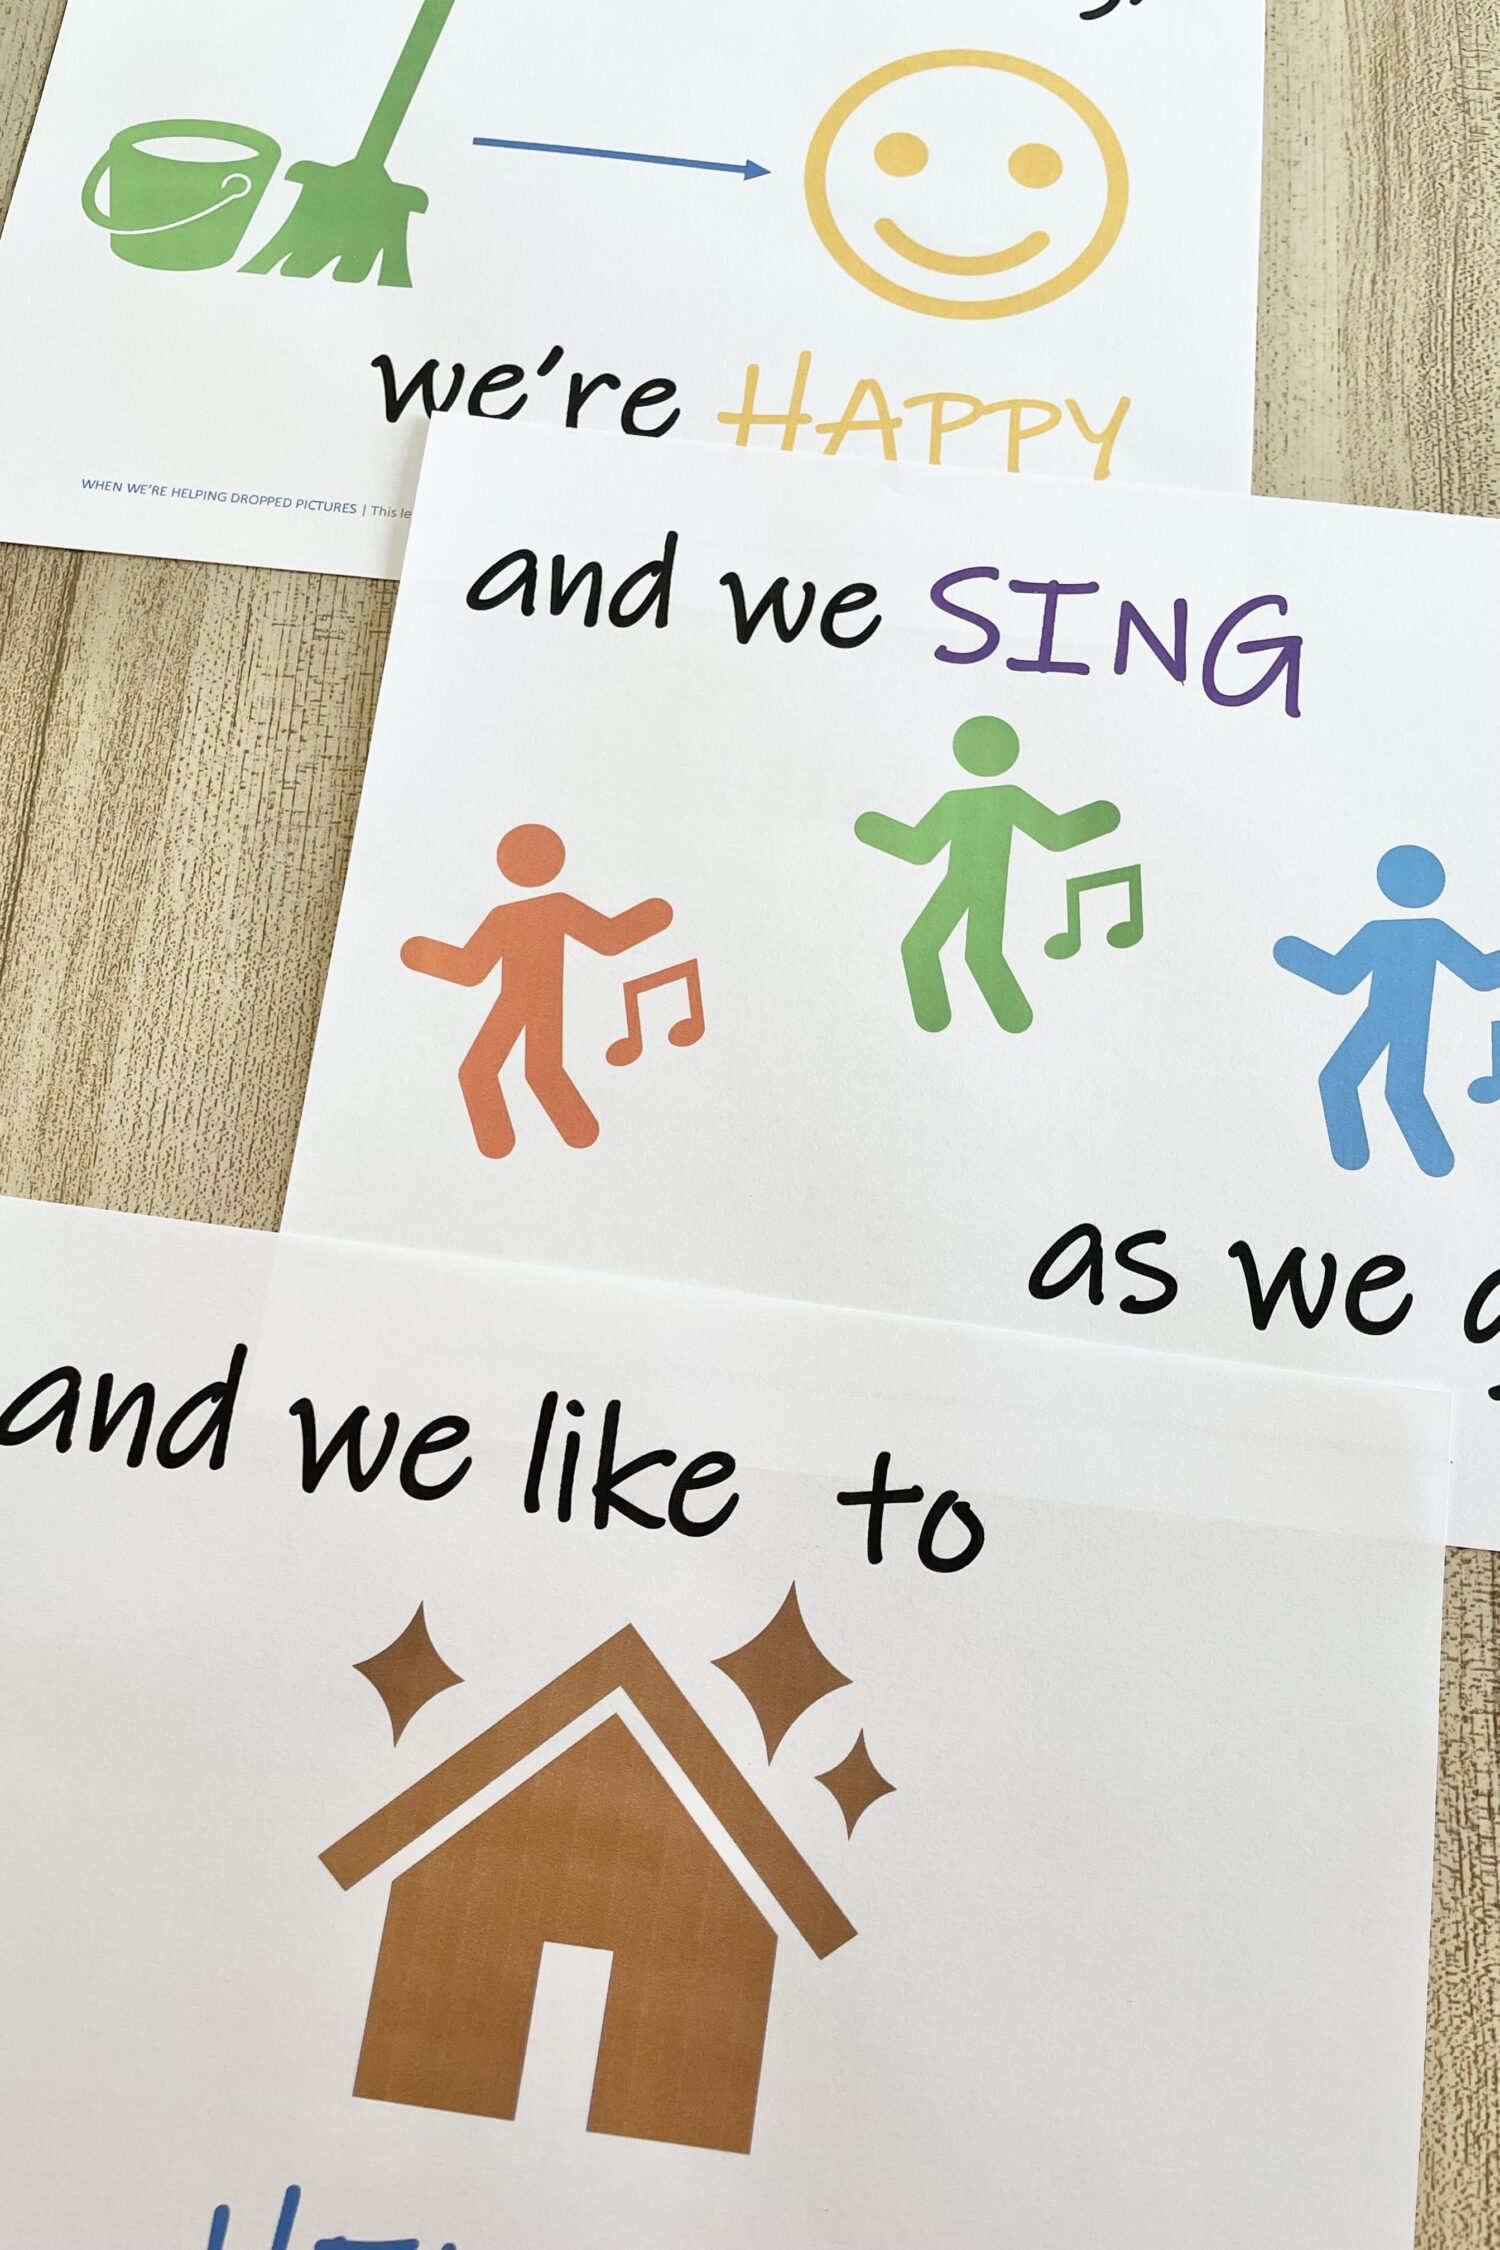 When We're Helping Dropped Pictures - Rearrange the pictures into the correct order in this fun singing time idea with printable song helps for LDS Primary Music Leaders.